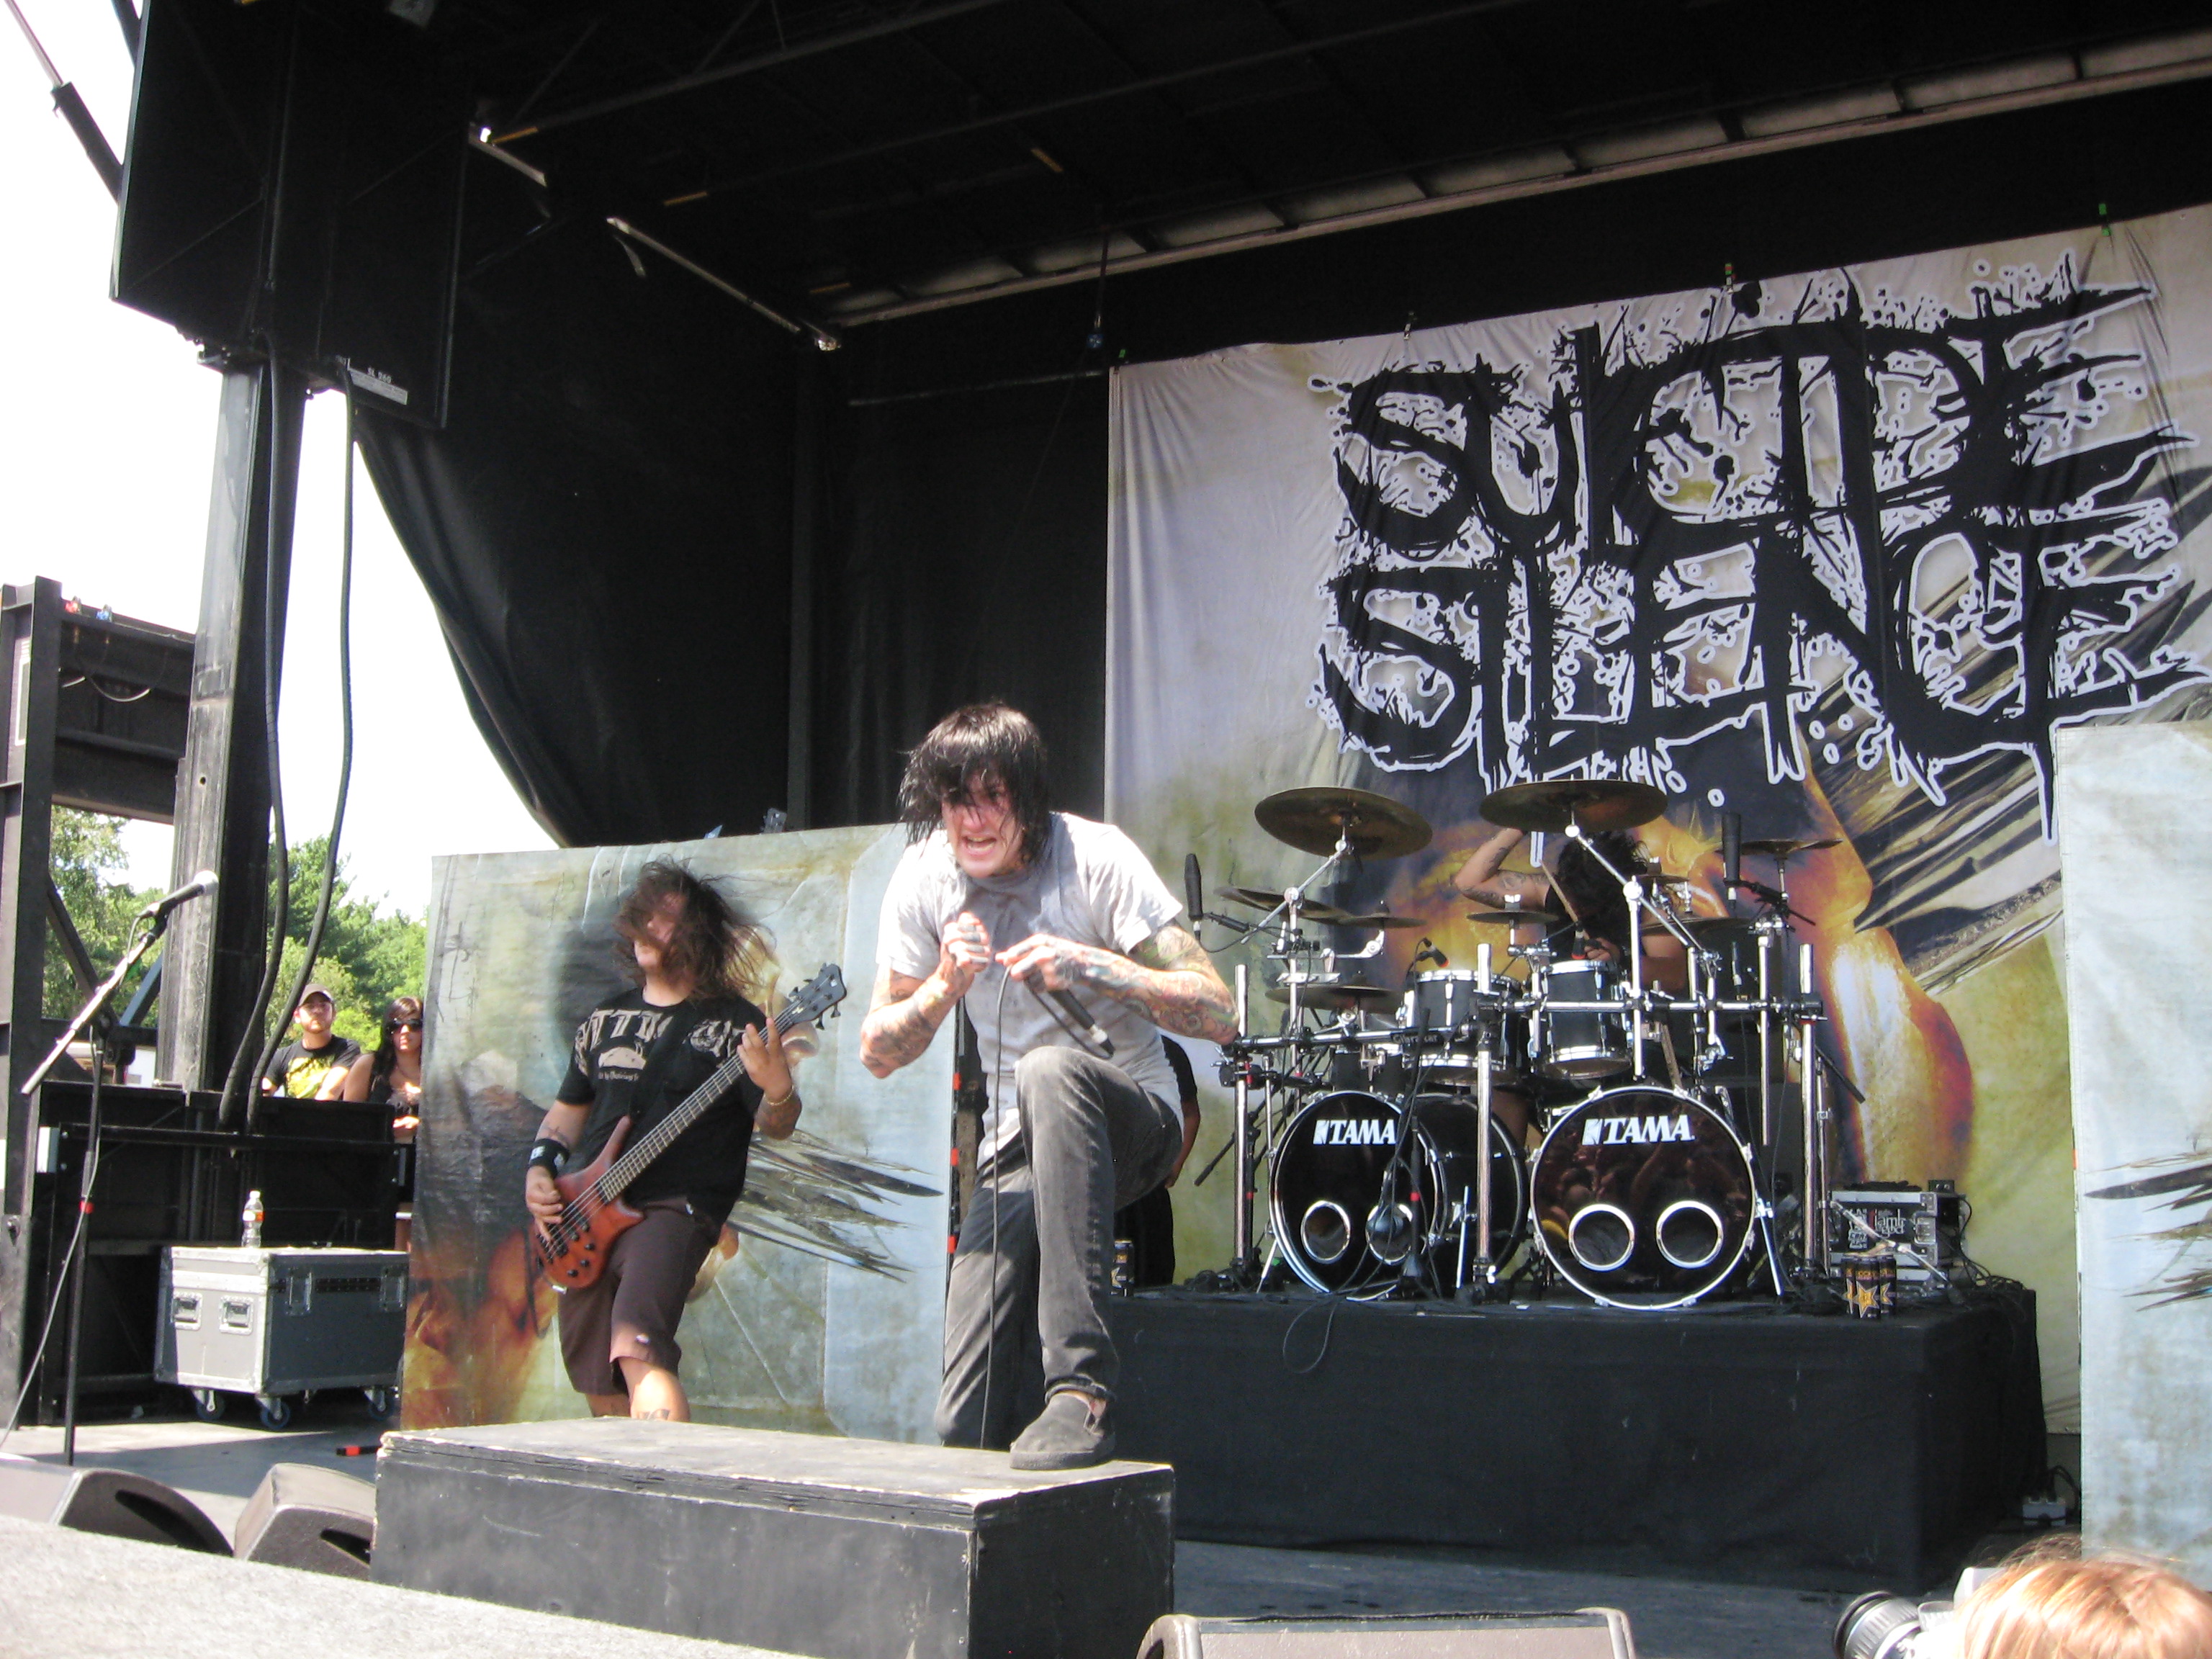 Suicide Silence - Wikipedia, the free encyclopedia